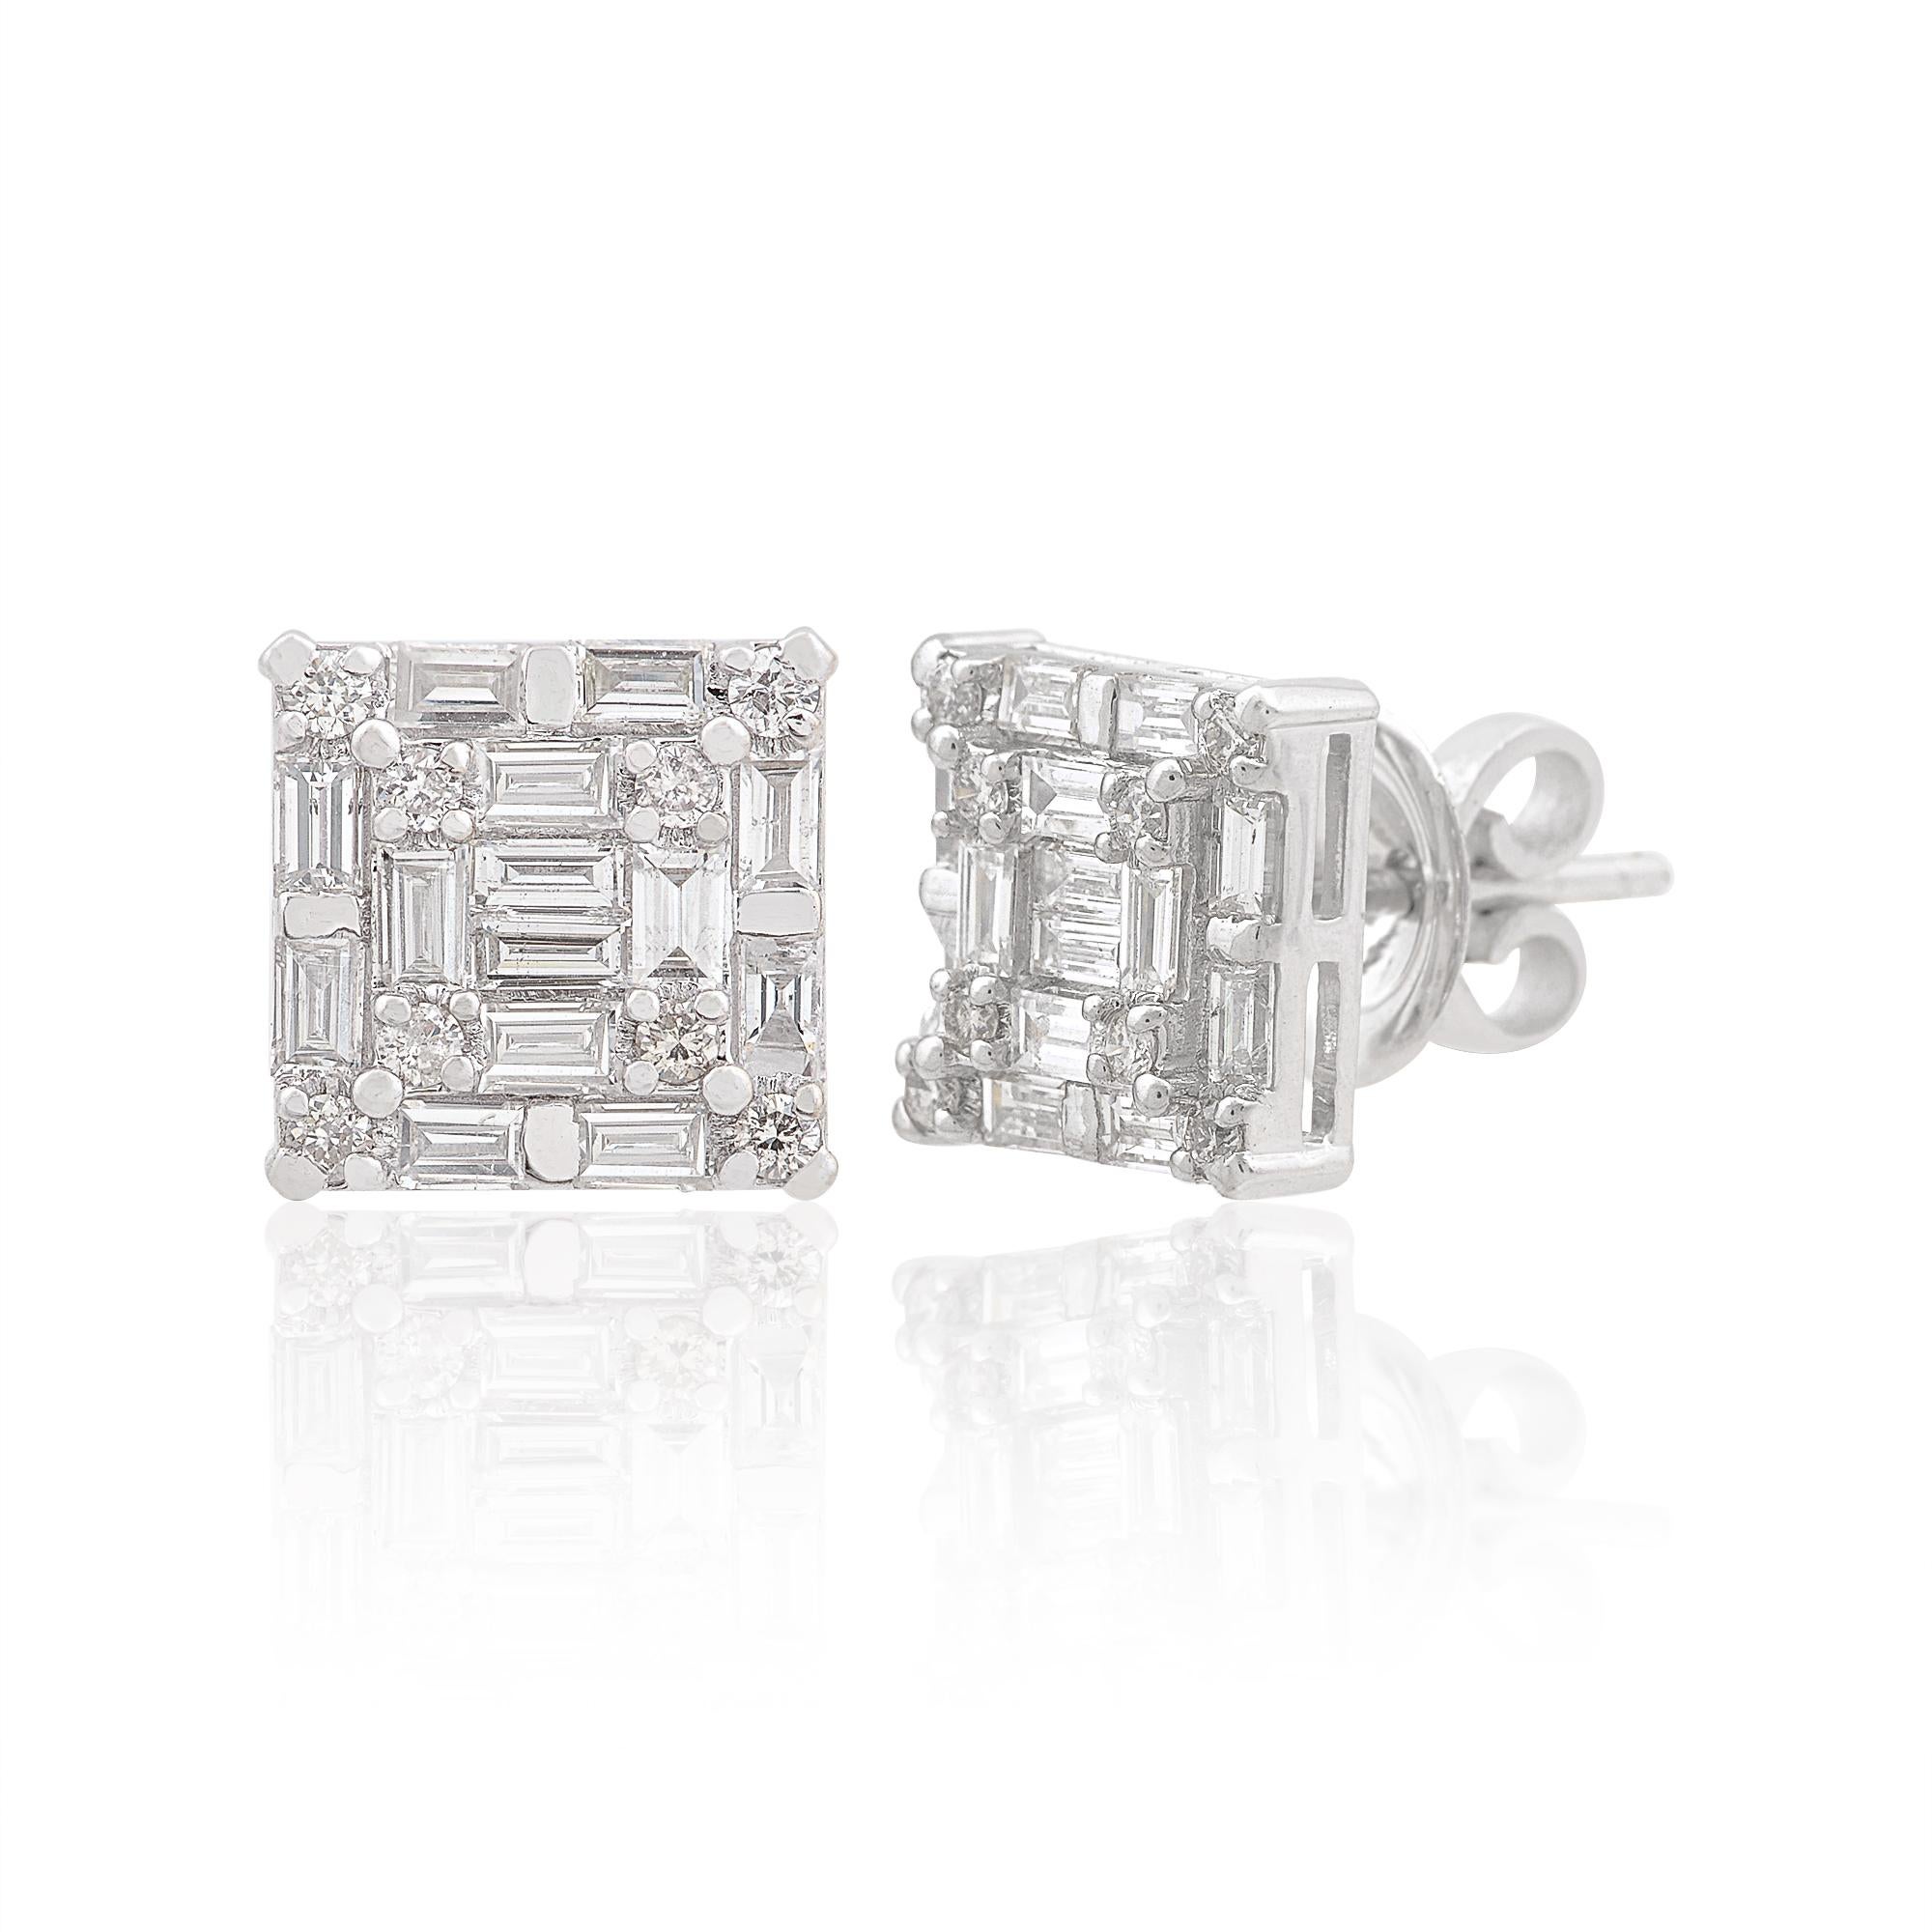 At the heart of each stud earring gleams a genuine 1 carat baguette-cut diamond, meticulously selected for its exceptional quality, clarity, and brilliance. The sleek and elongated shape of the baguette-cut diamonds adds a touch of modernity and